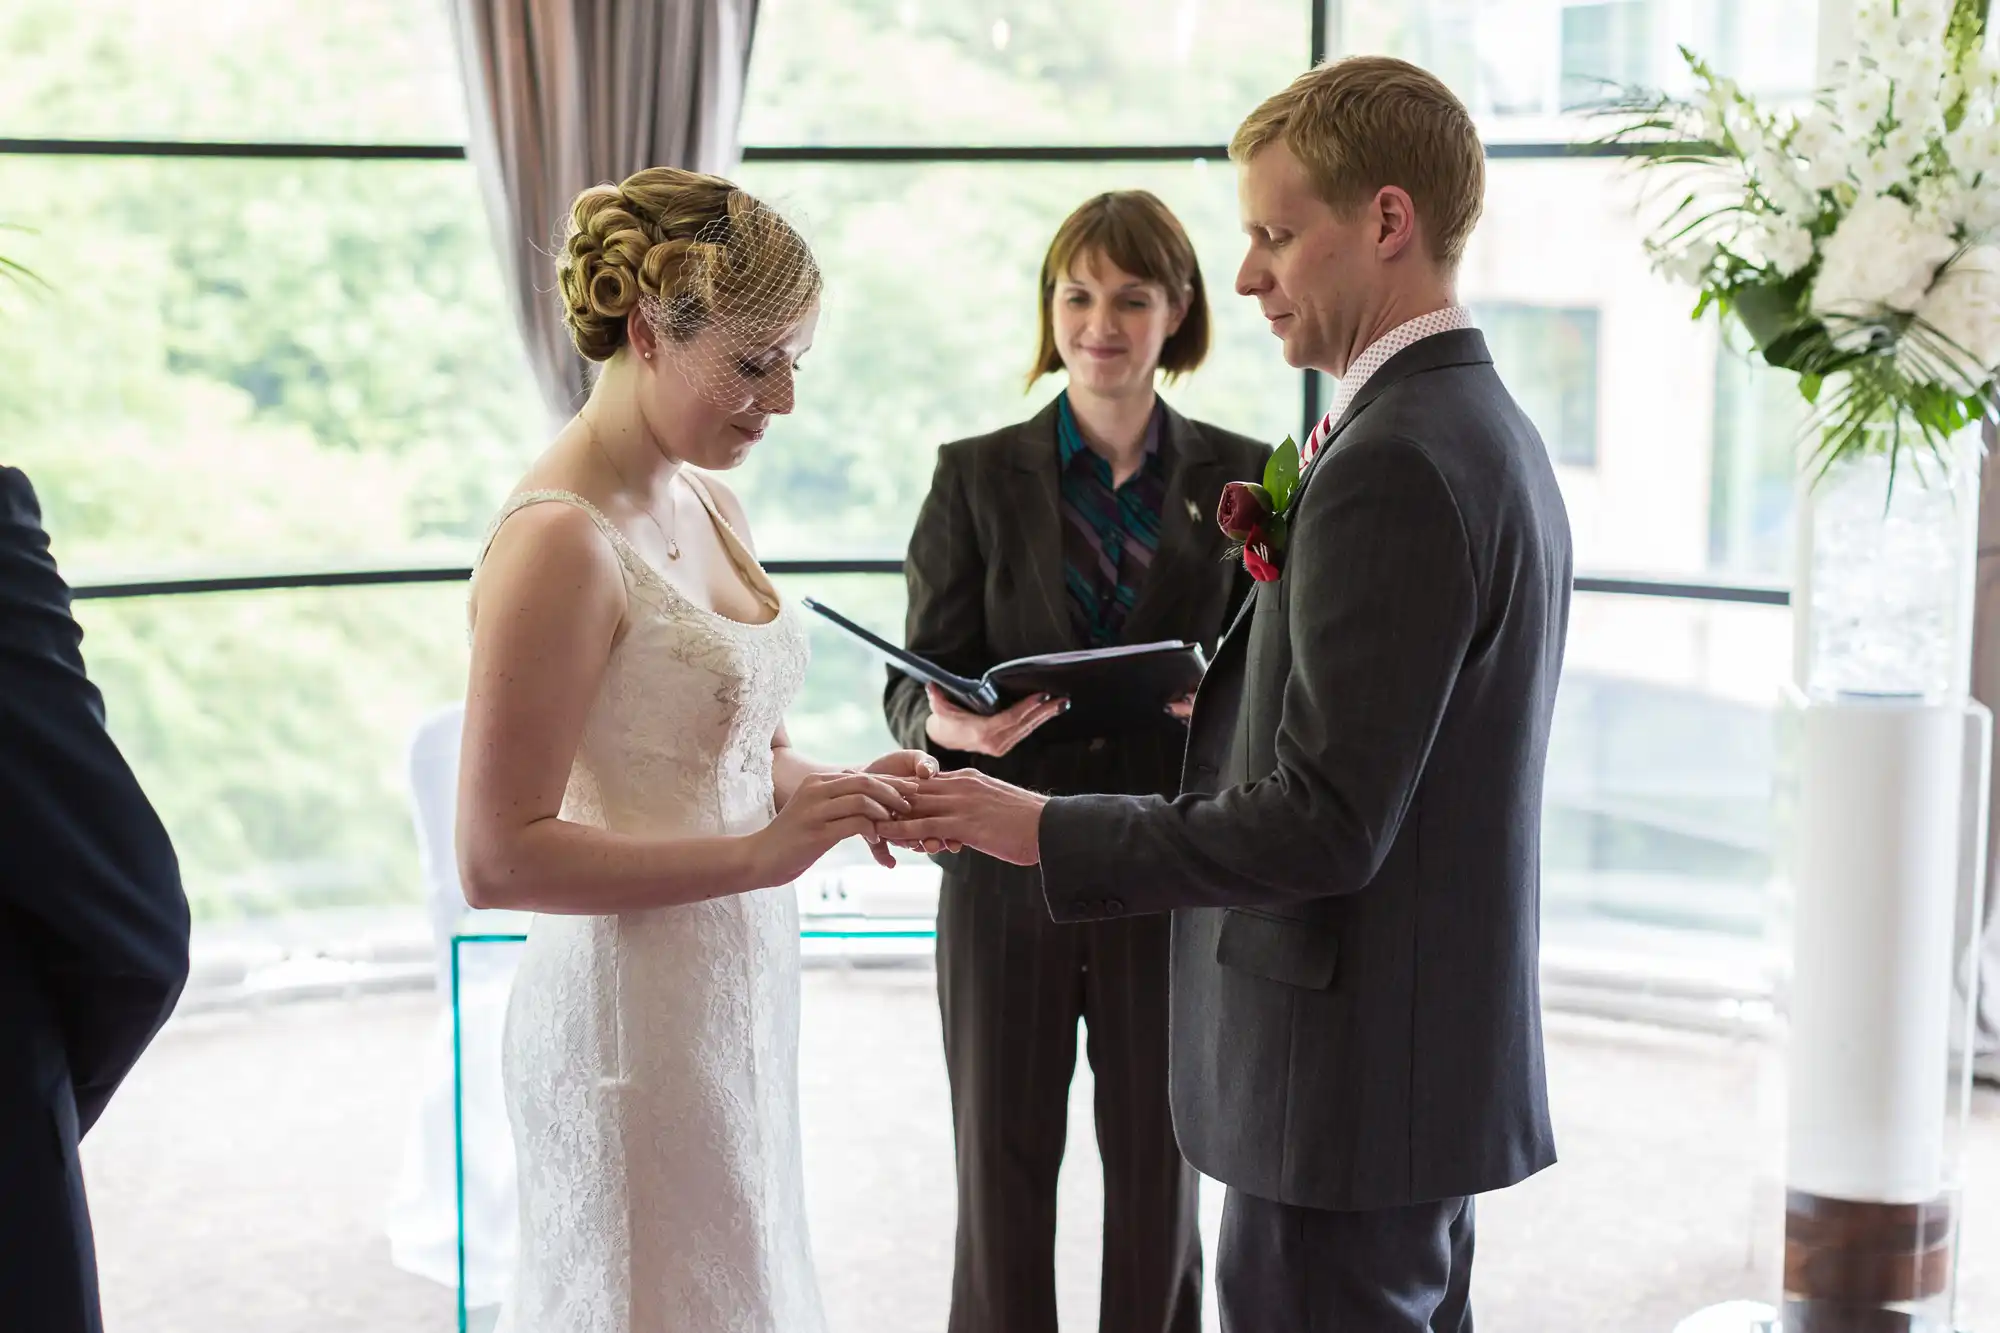 A bride and groom exchange rings during their wedding ceremony, with an officiant watching in the background.